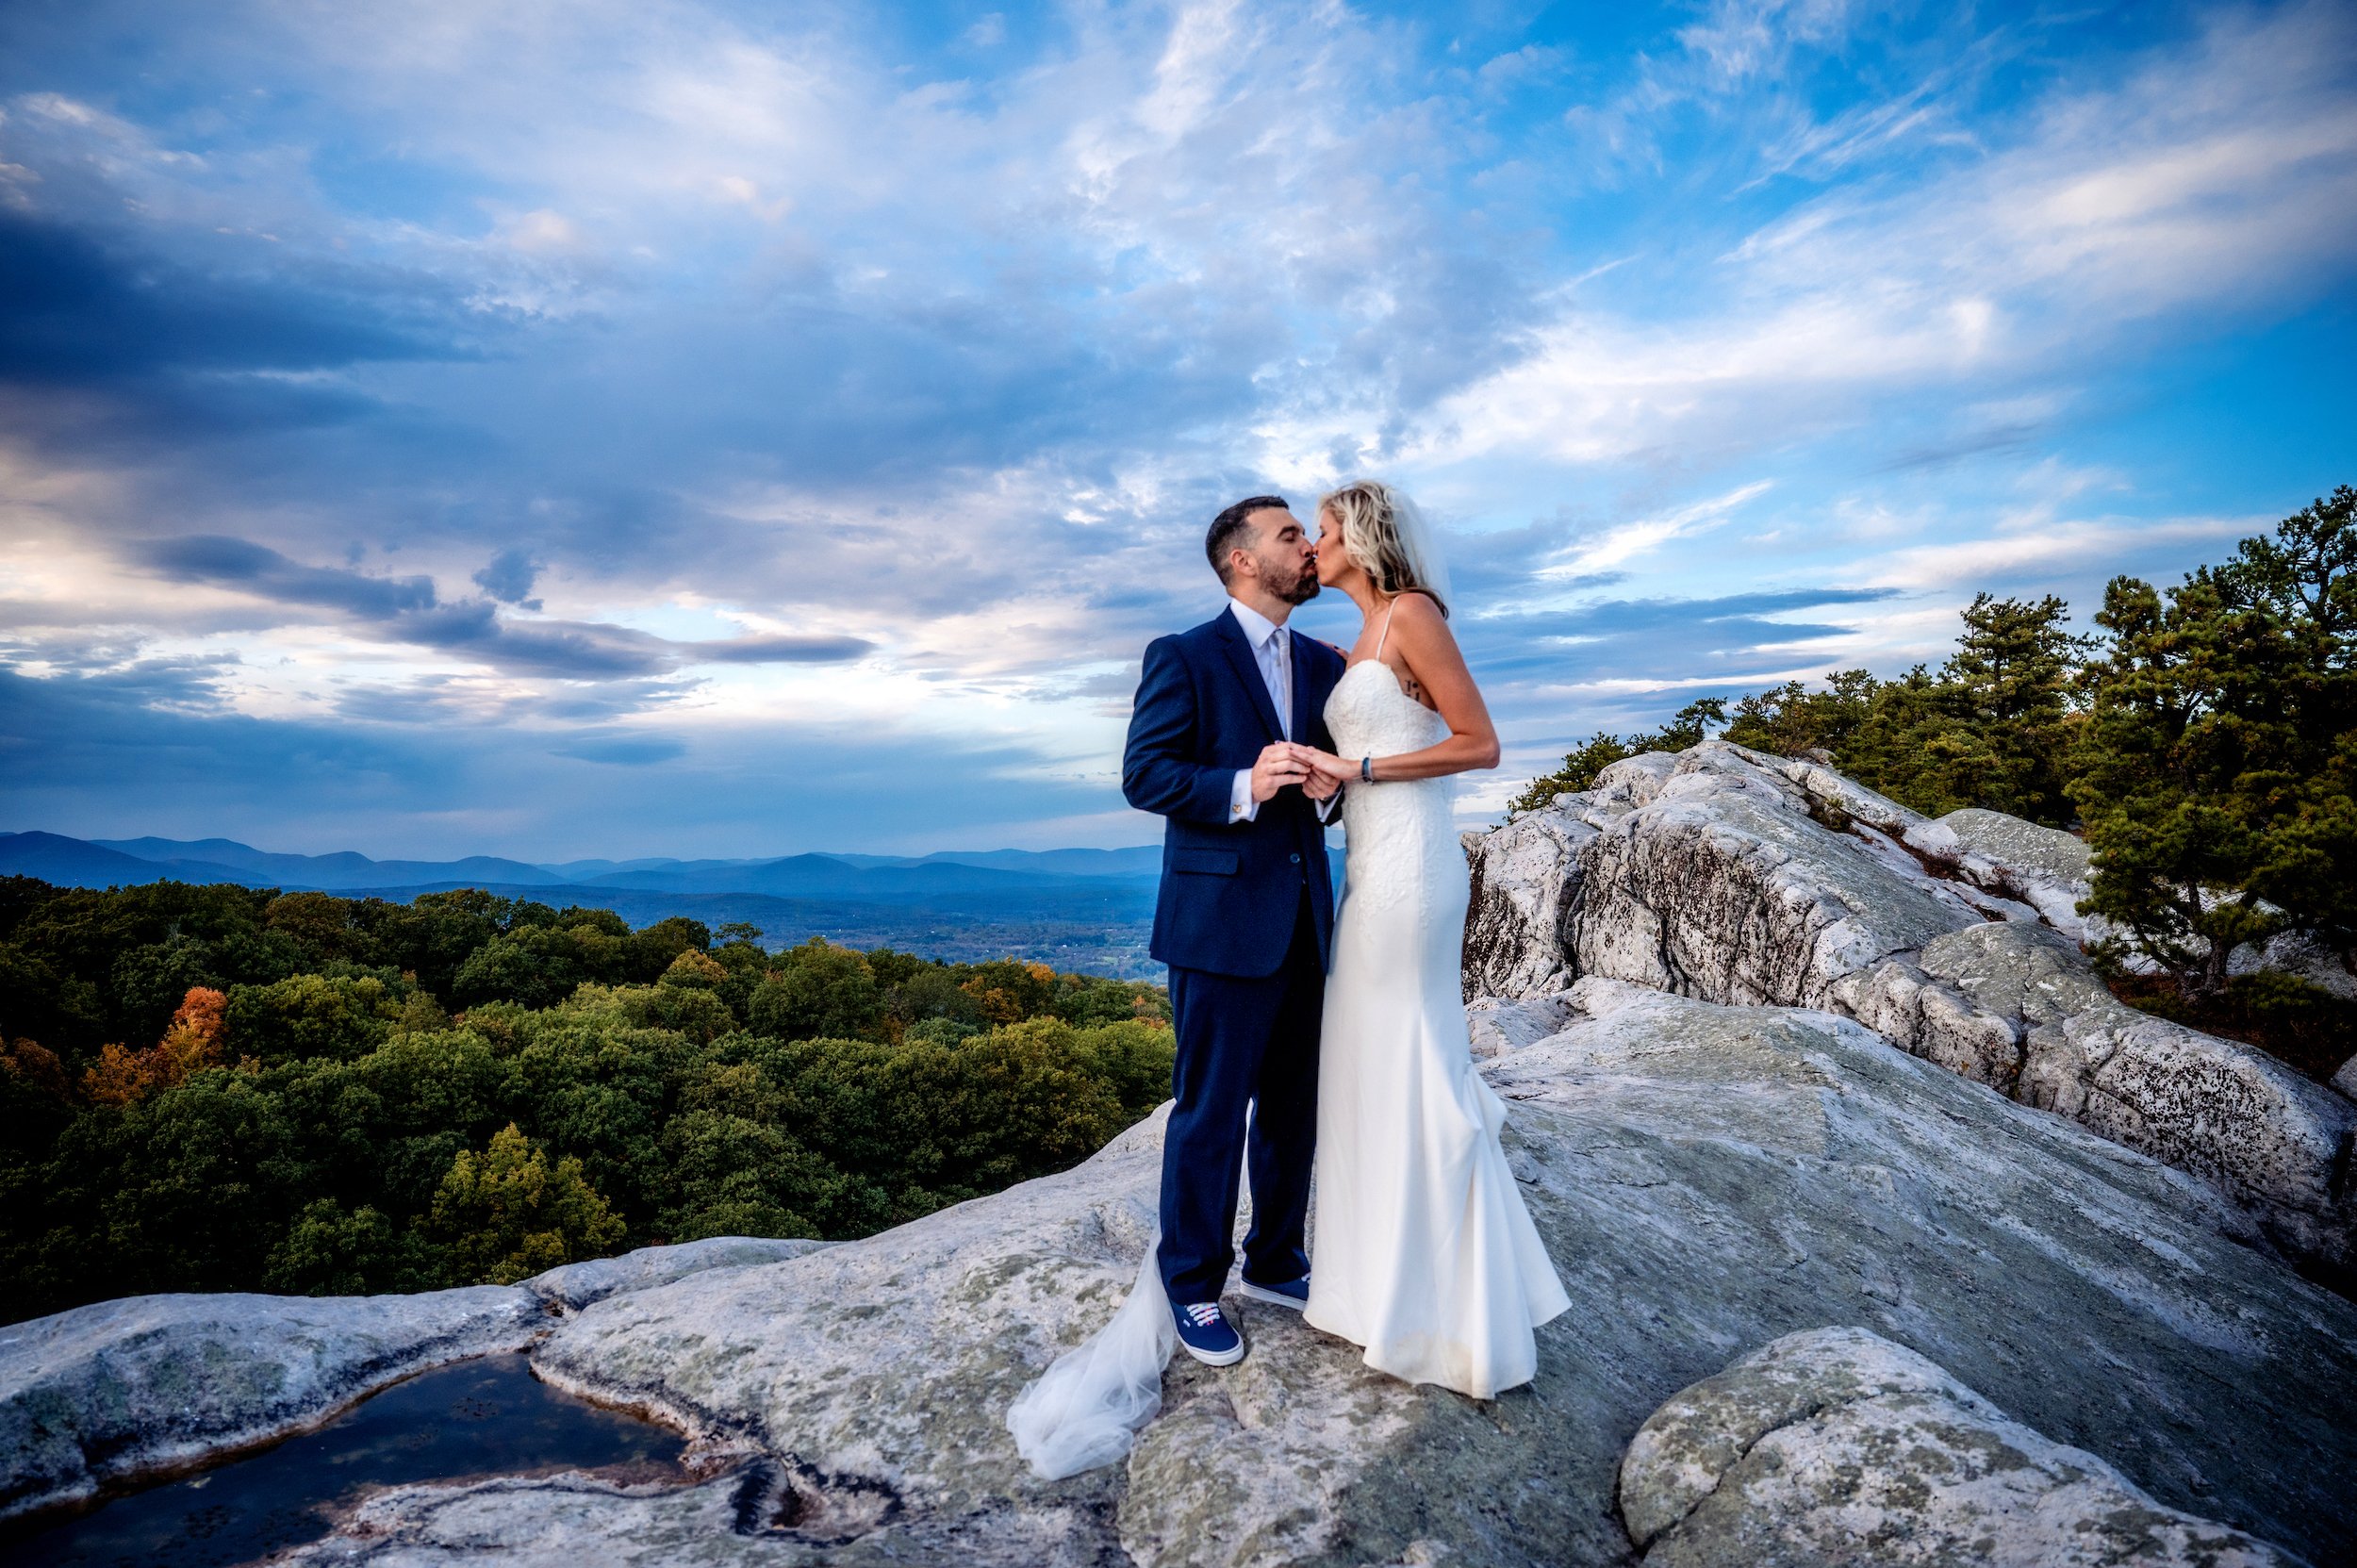 Jeff_Tisman_Photography_Jill_and_Mike_Vow_Renewal_14_Bride_and_Groom_Kiss_Millbrook_Preserve.jpg